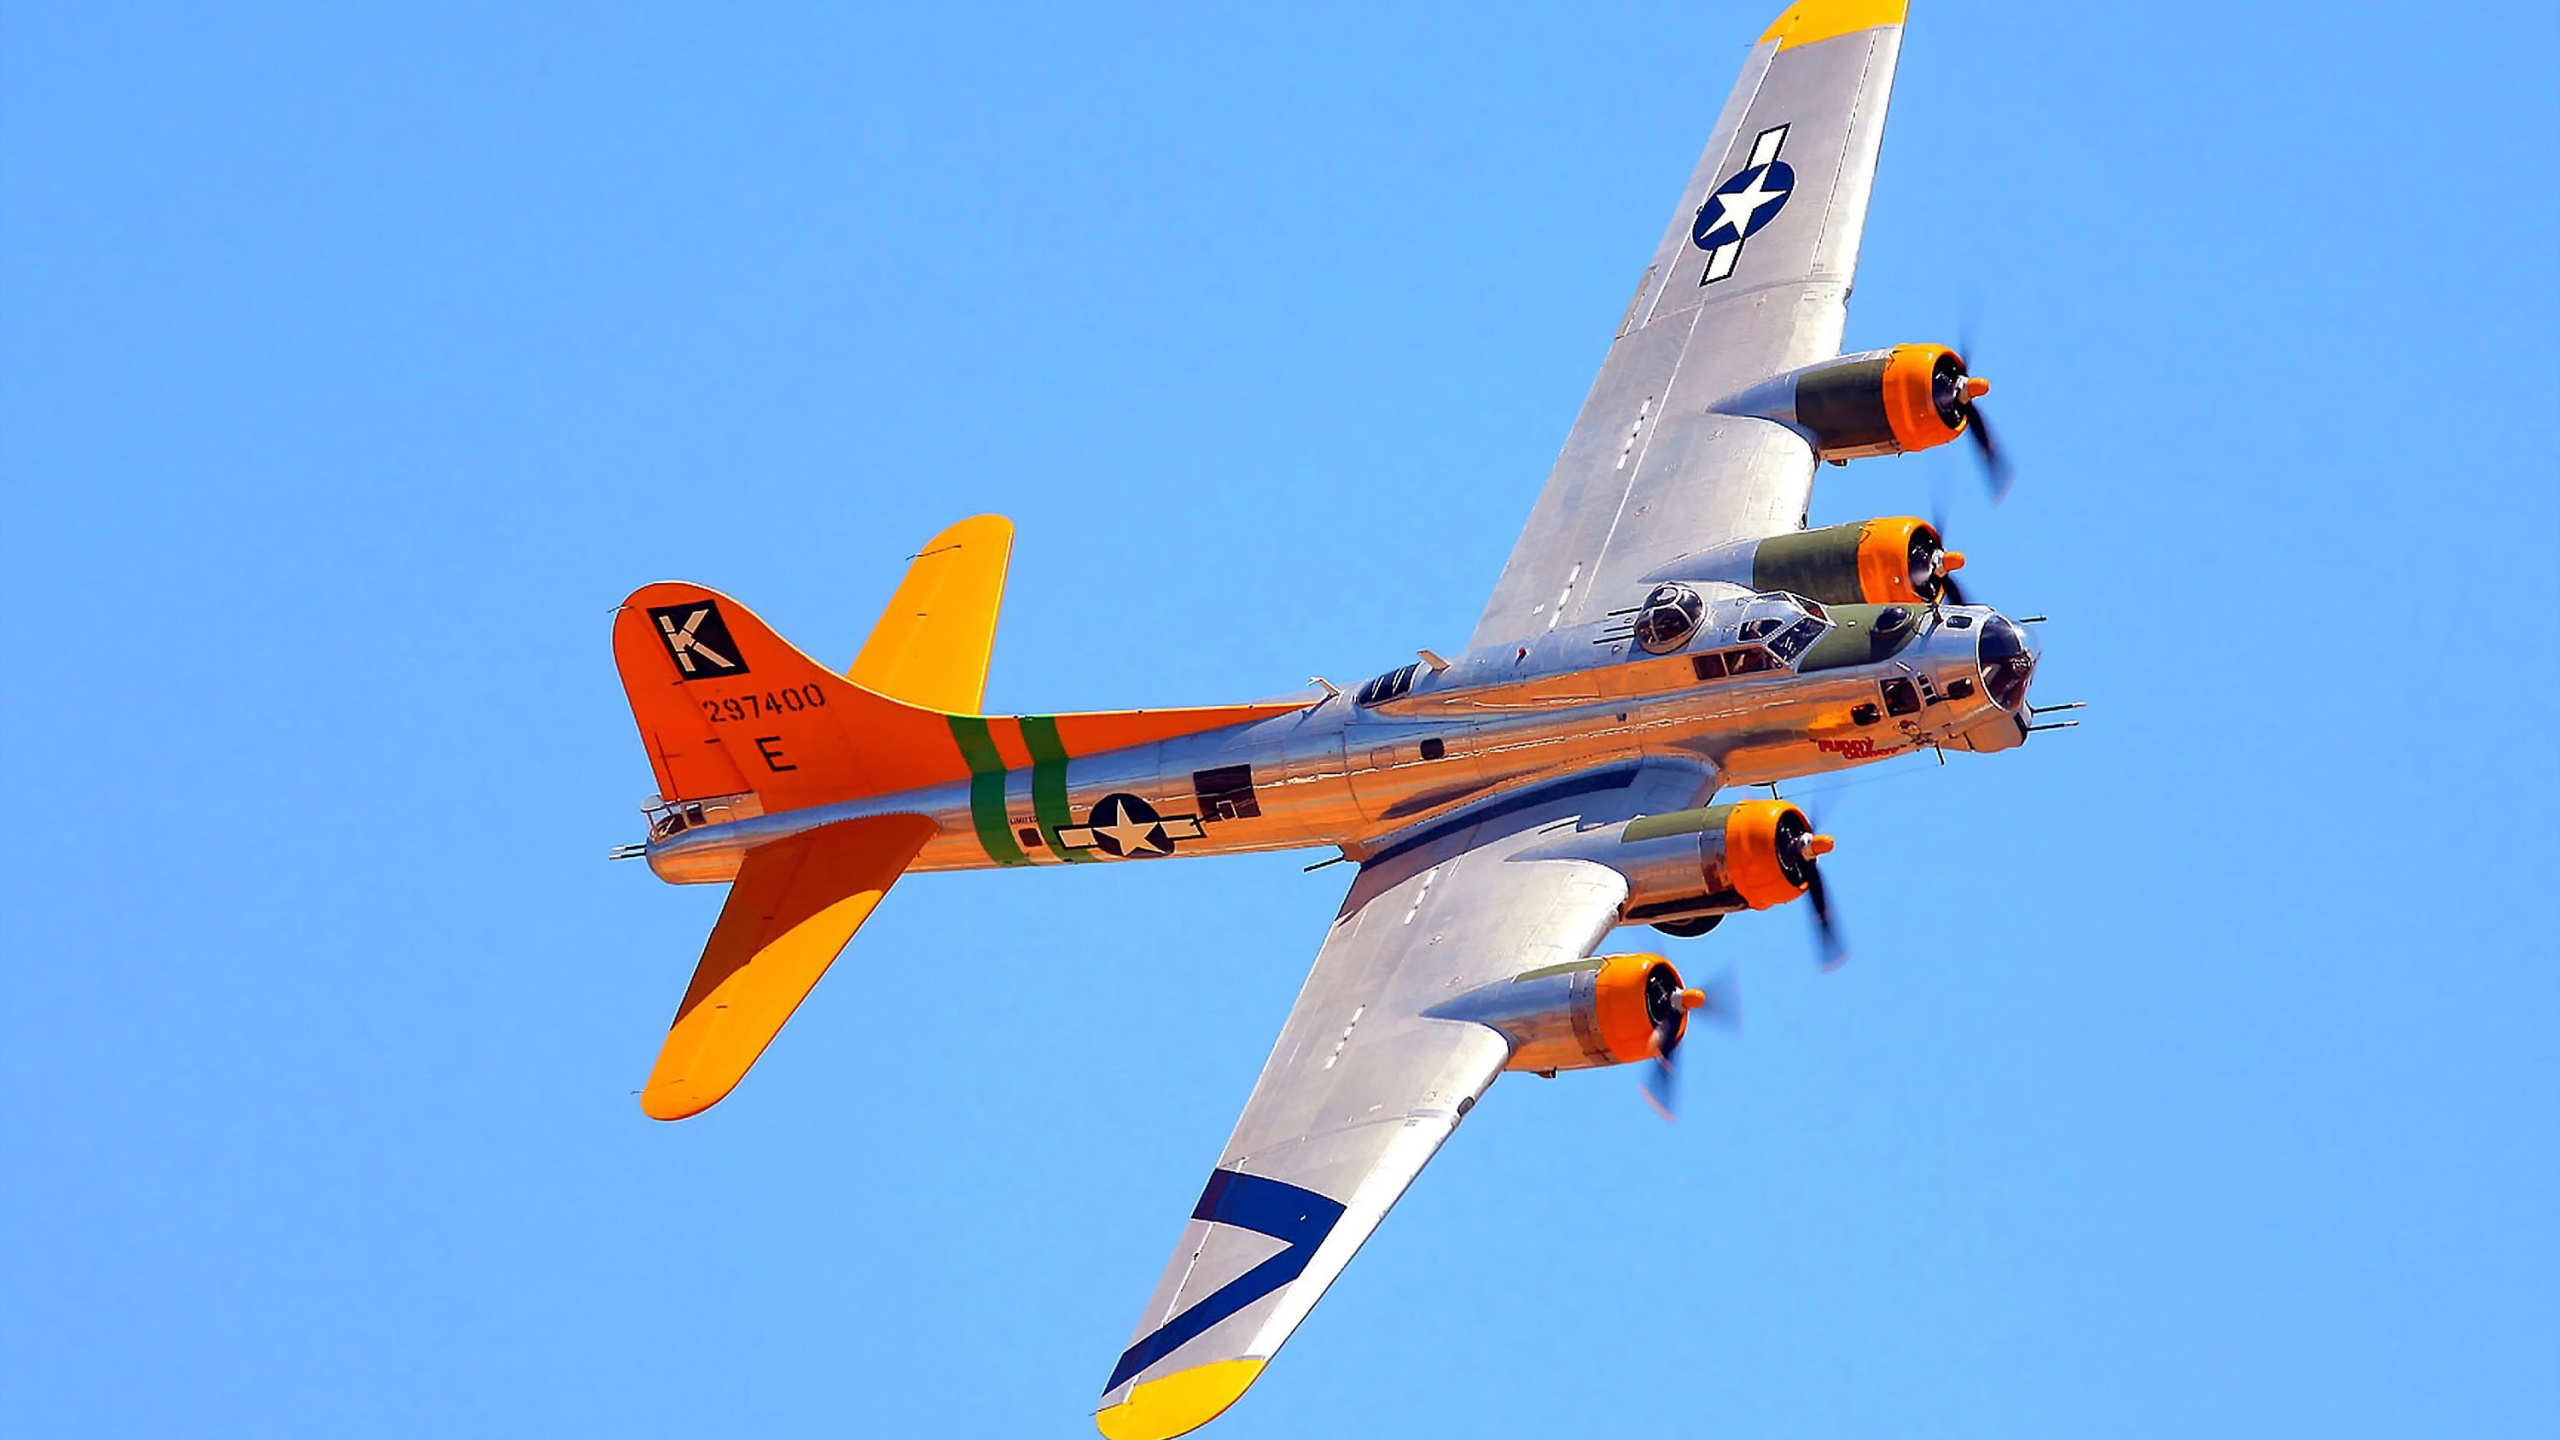 Orange and Yellow Jet Plane in Mid Air During Daytime. Wallpaper in 2560x1440 Resolution